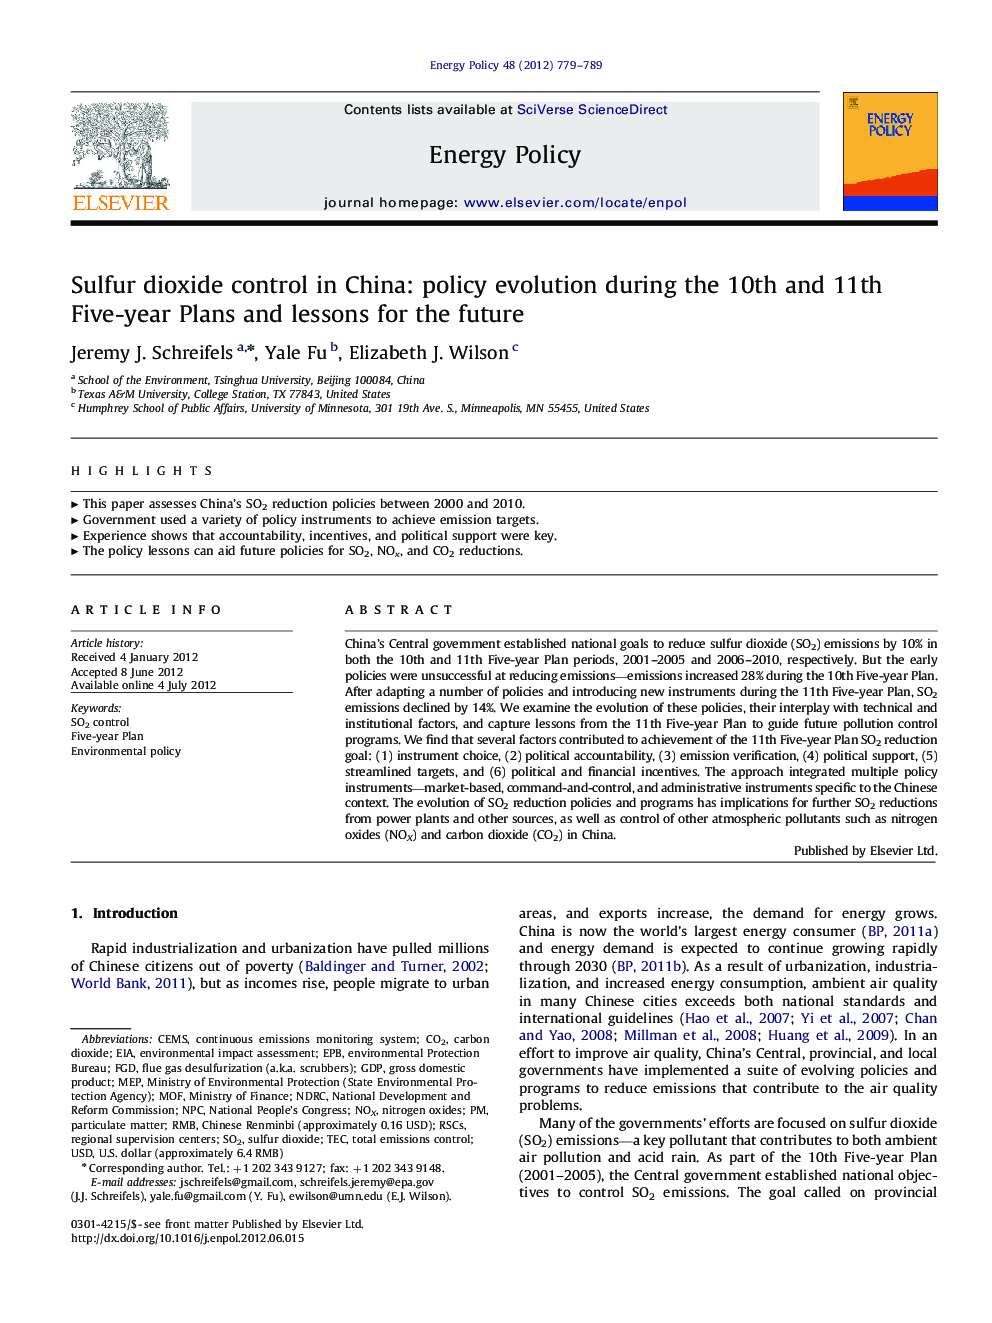 Sulfur dioxide control in China: policy evolution during the 10th and 11th Five-year Plans and lessons for the future